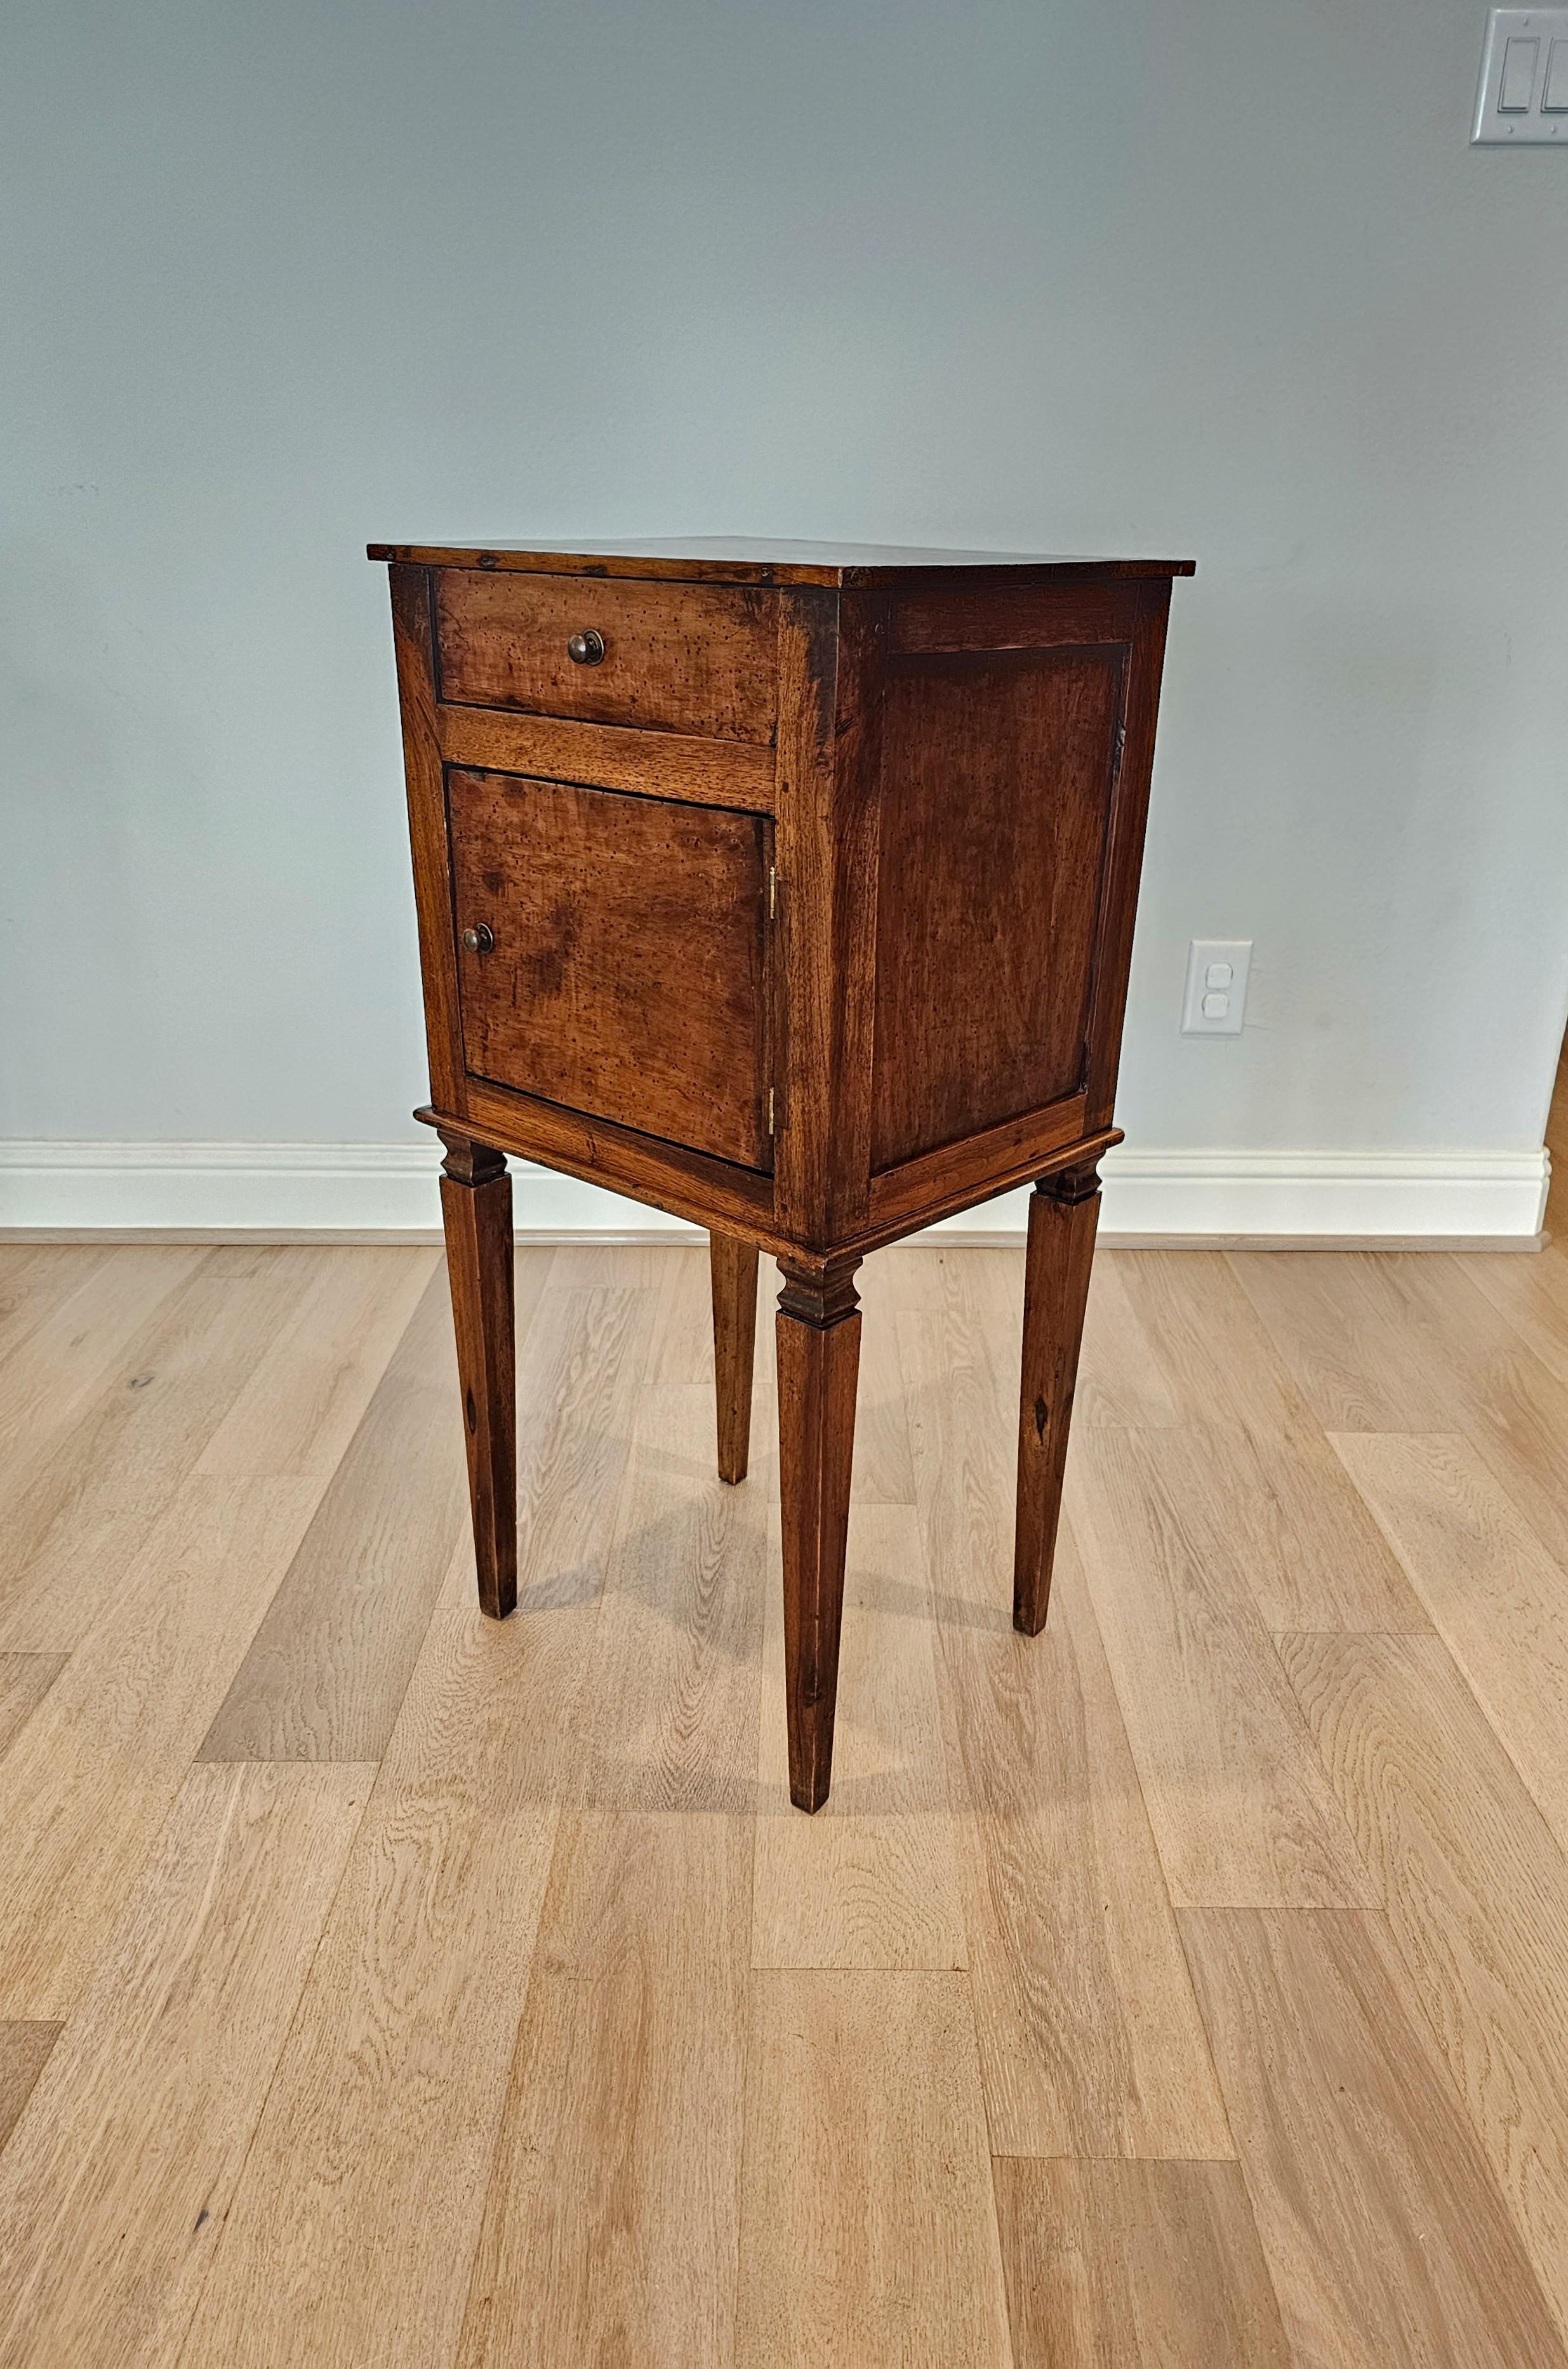 Hand-Crafted 19th Century Italian Neoclassical Walnut Side Table Bedside Cabinet For Sale